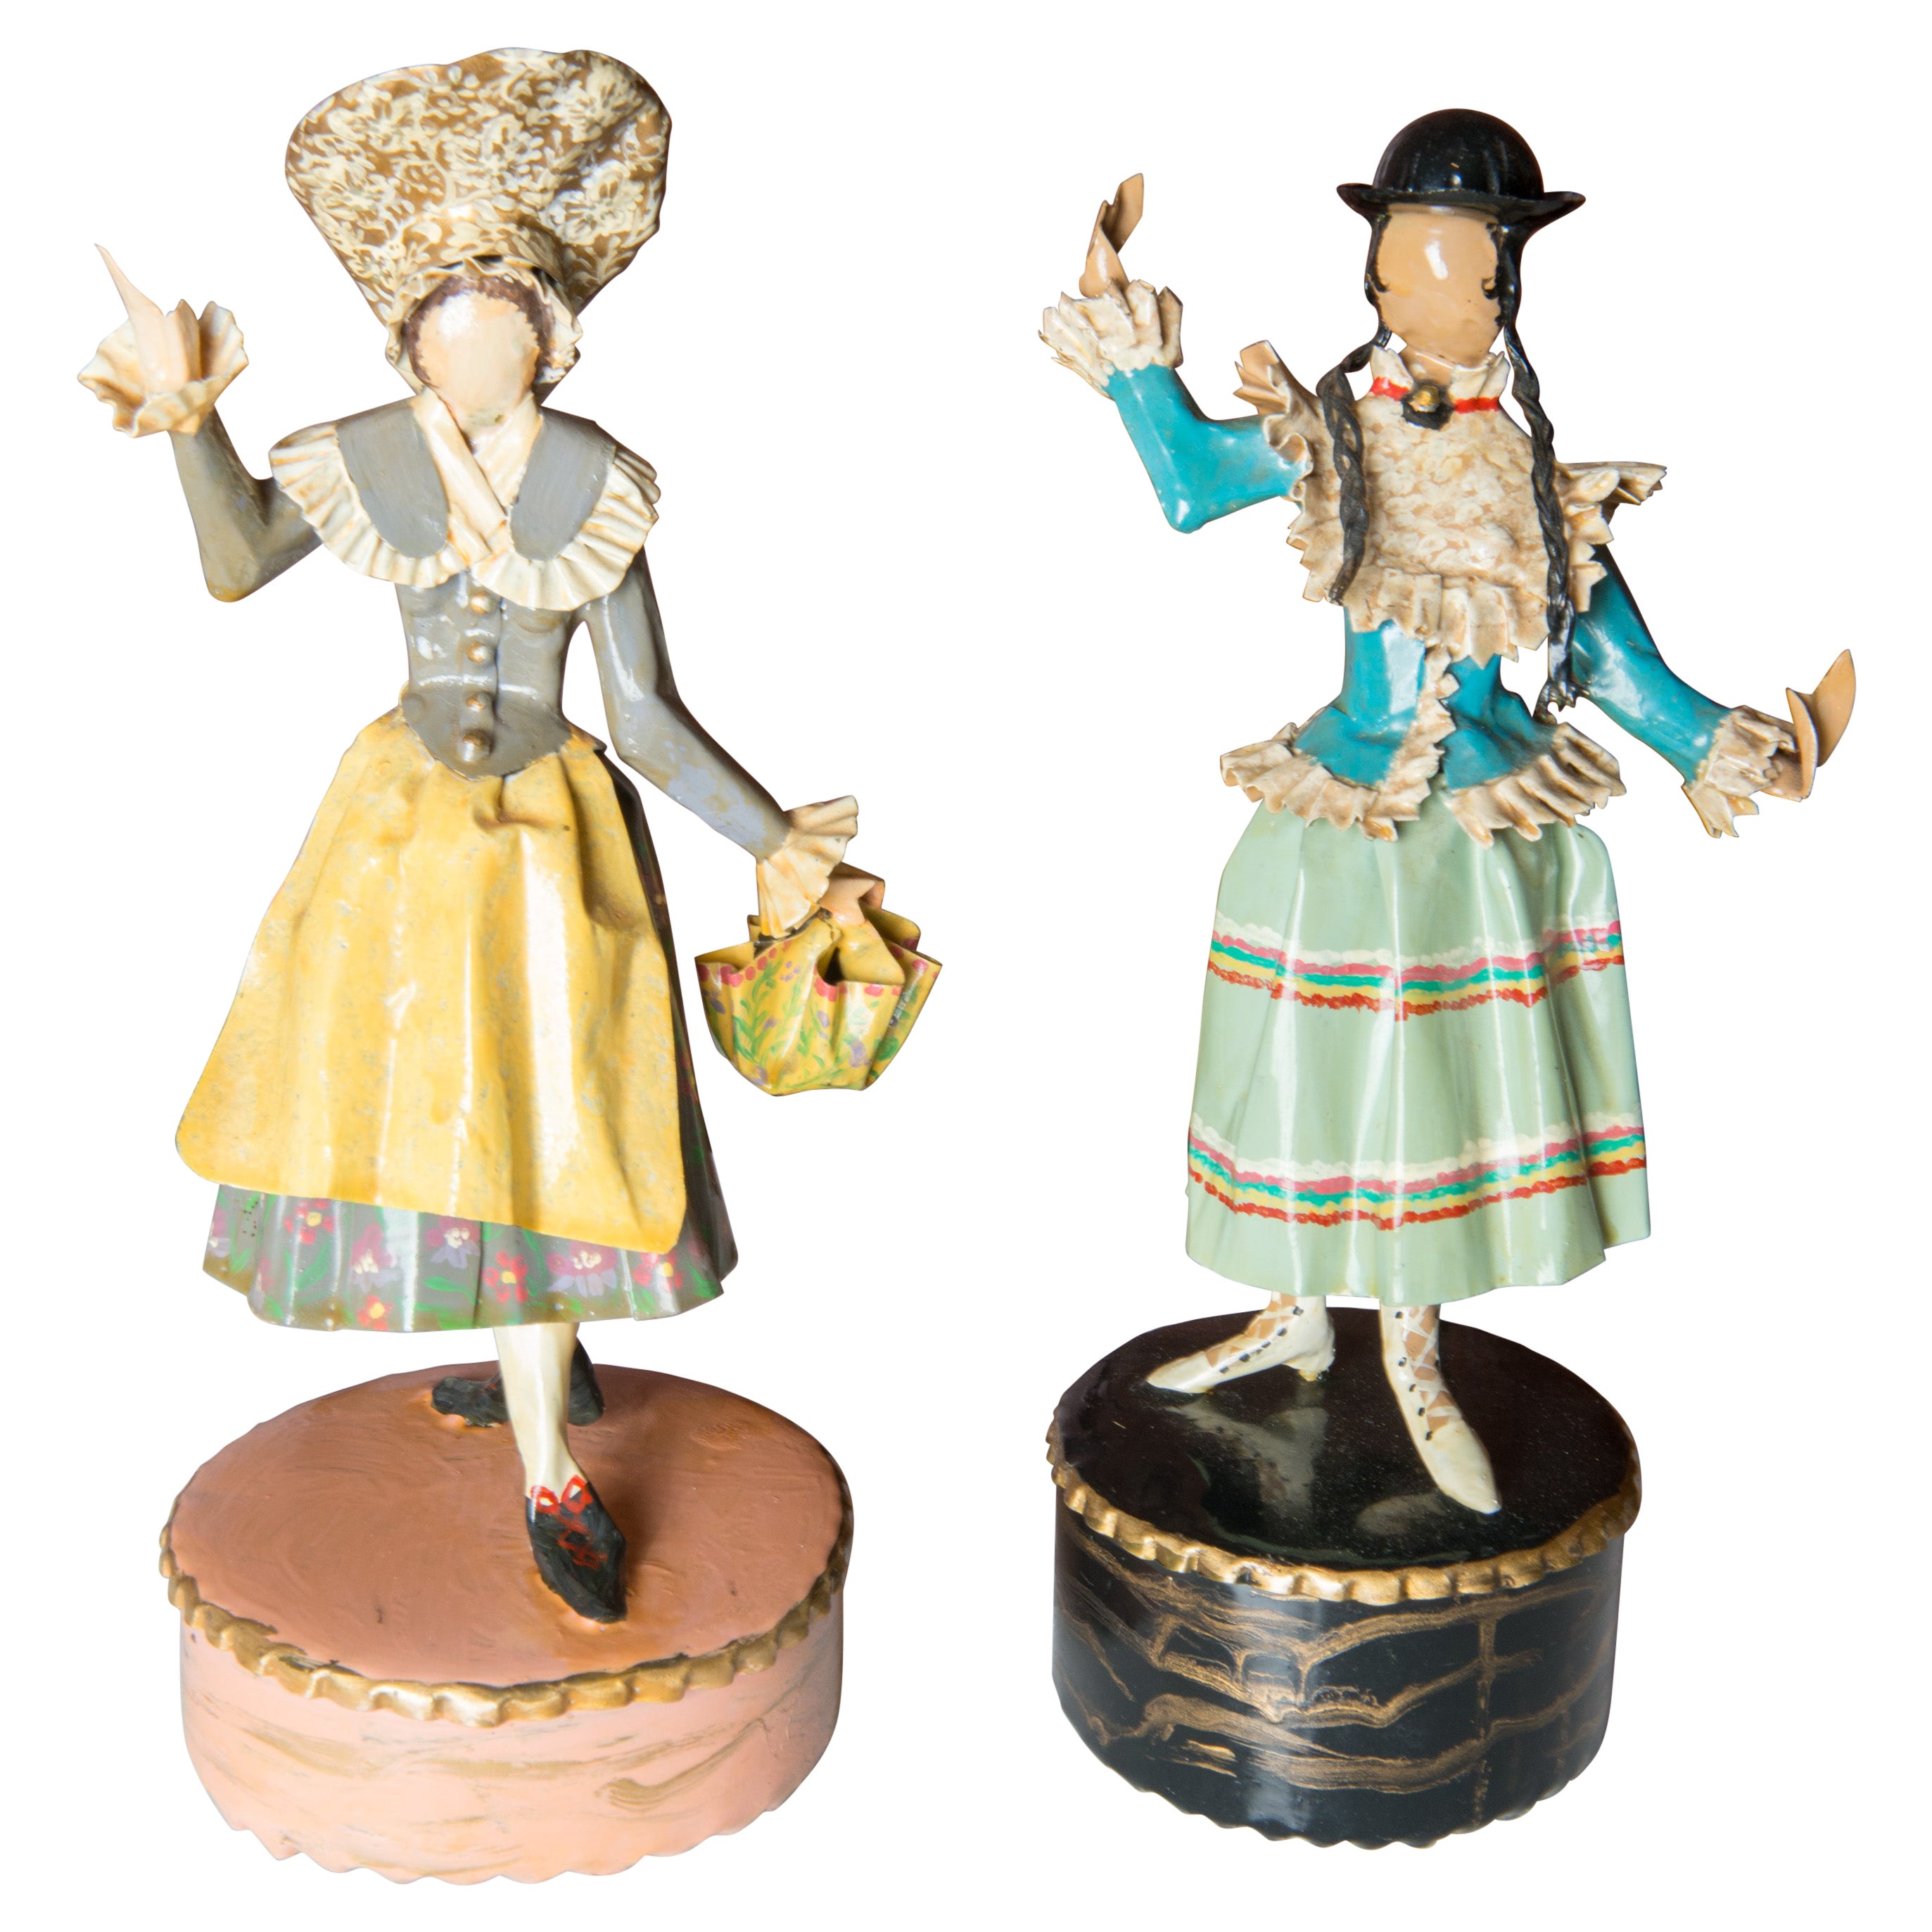 Pair of Figural Sculptures in Traditional Austrian Costumes by Lee Menichetti